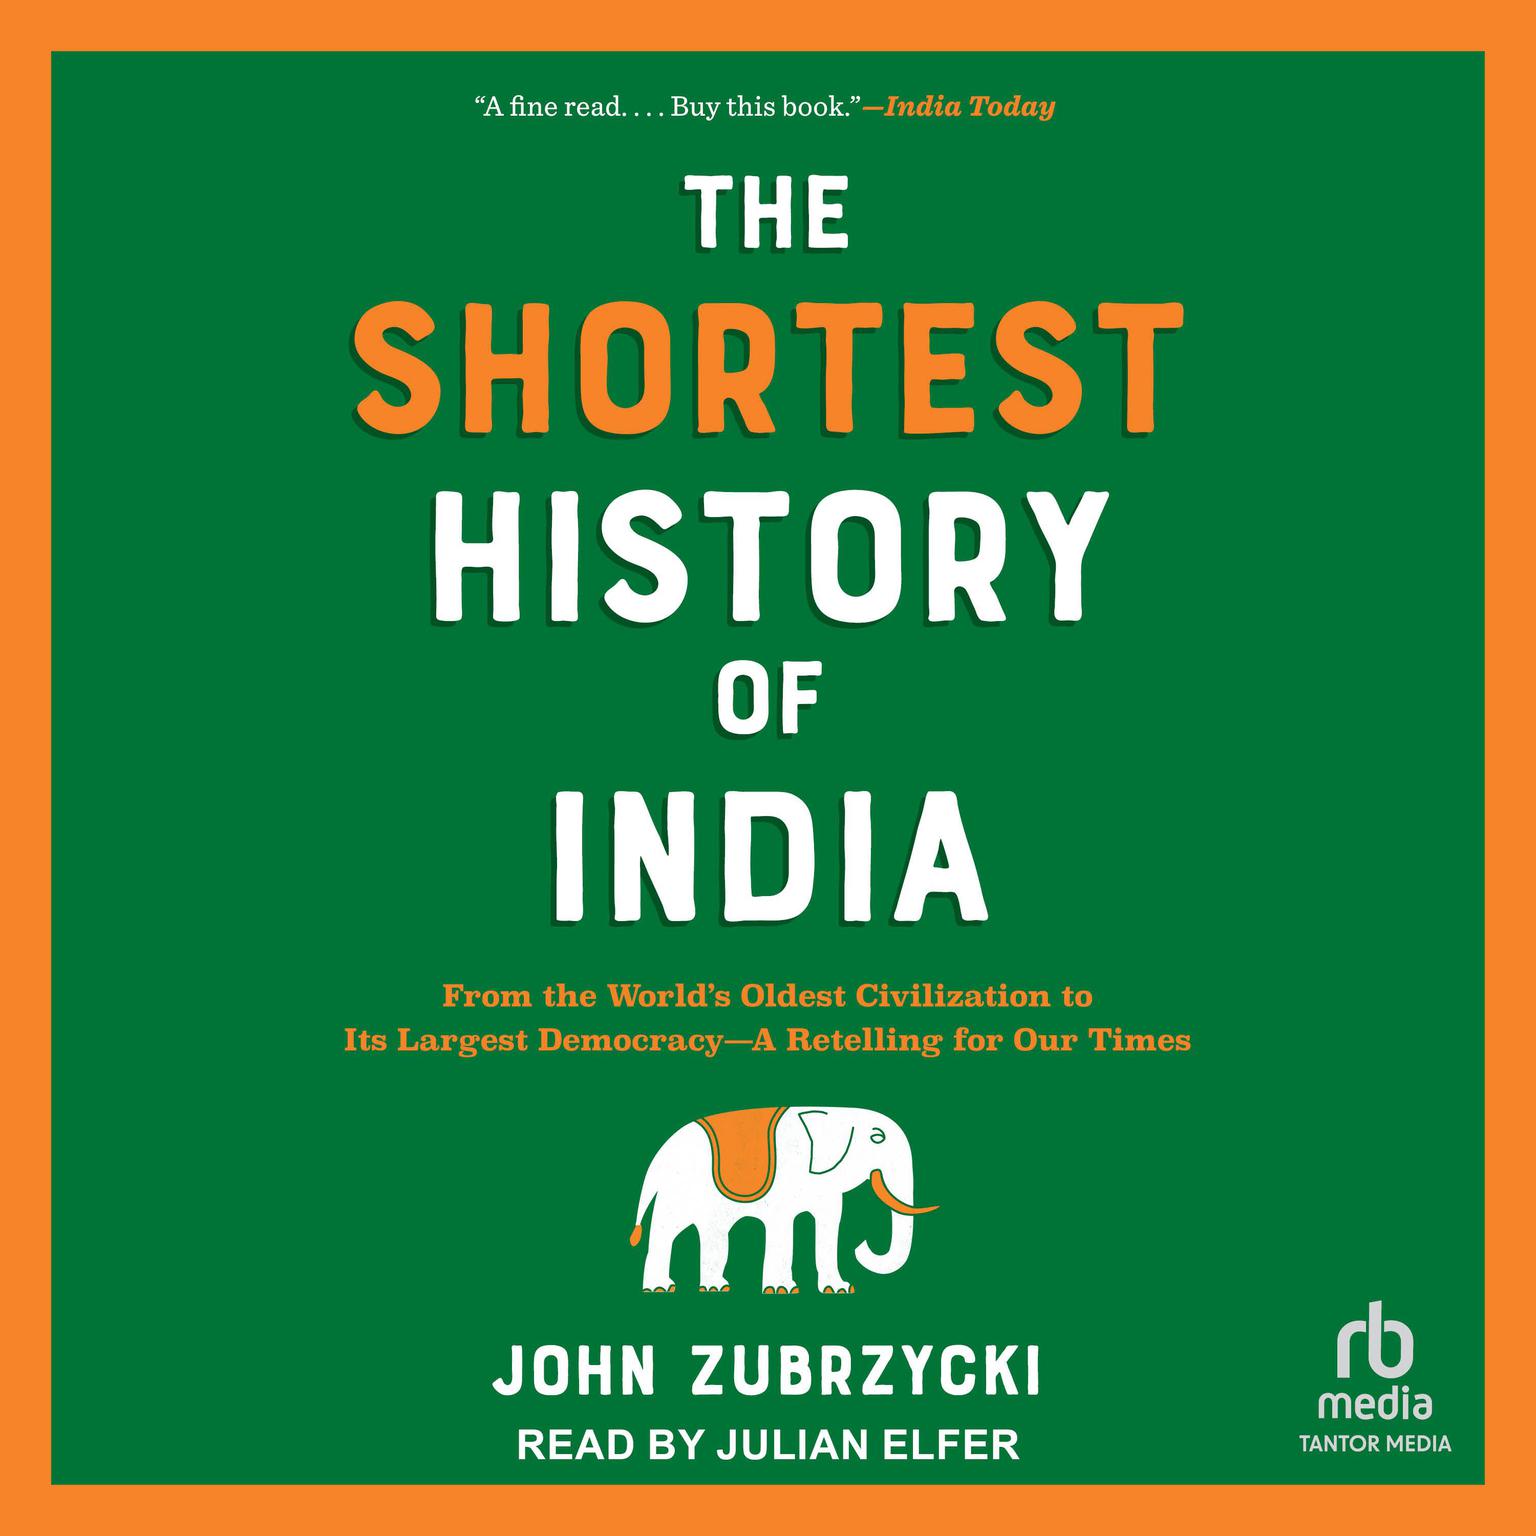 The Shortest History of India: From the Worlds Oldest Civilization to Its Largest Democracy—A Retelling for Our Times Audiobook, by John Zubrzycki